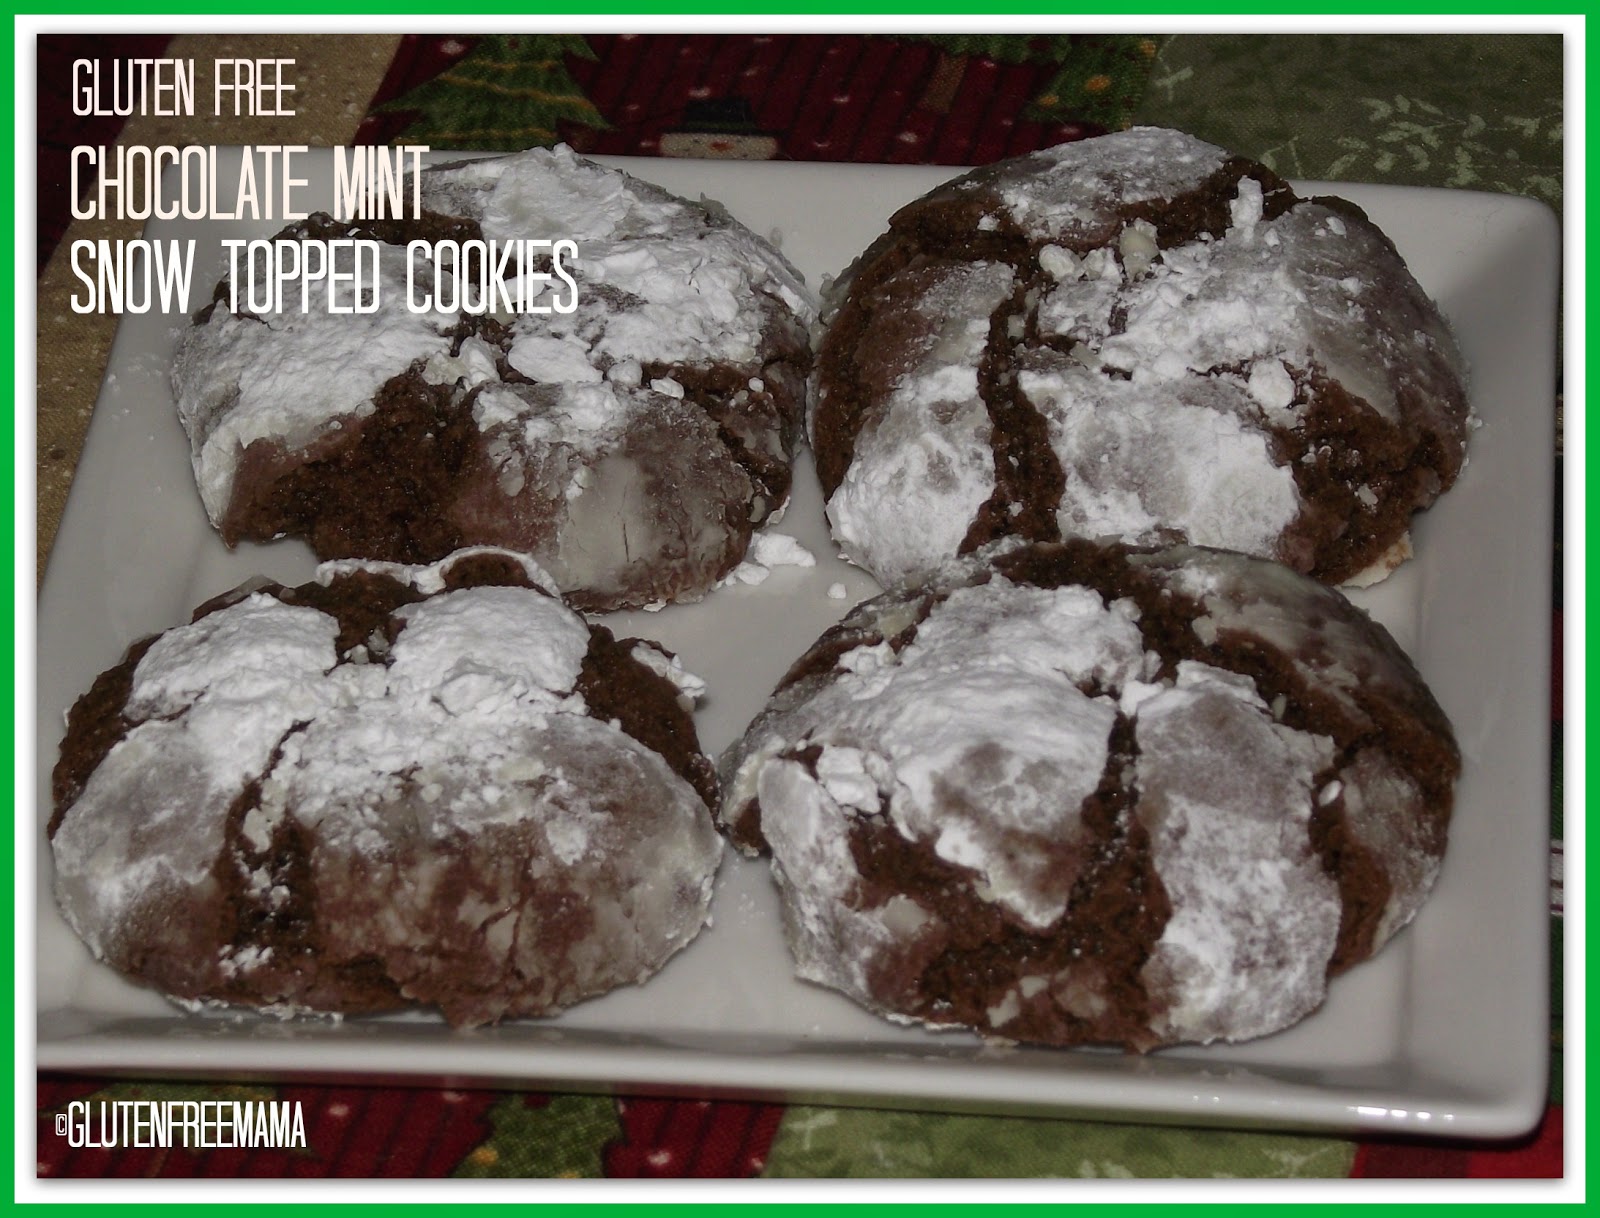 Chocolate Mint Snow Topped Cookies